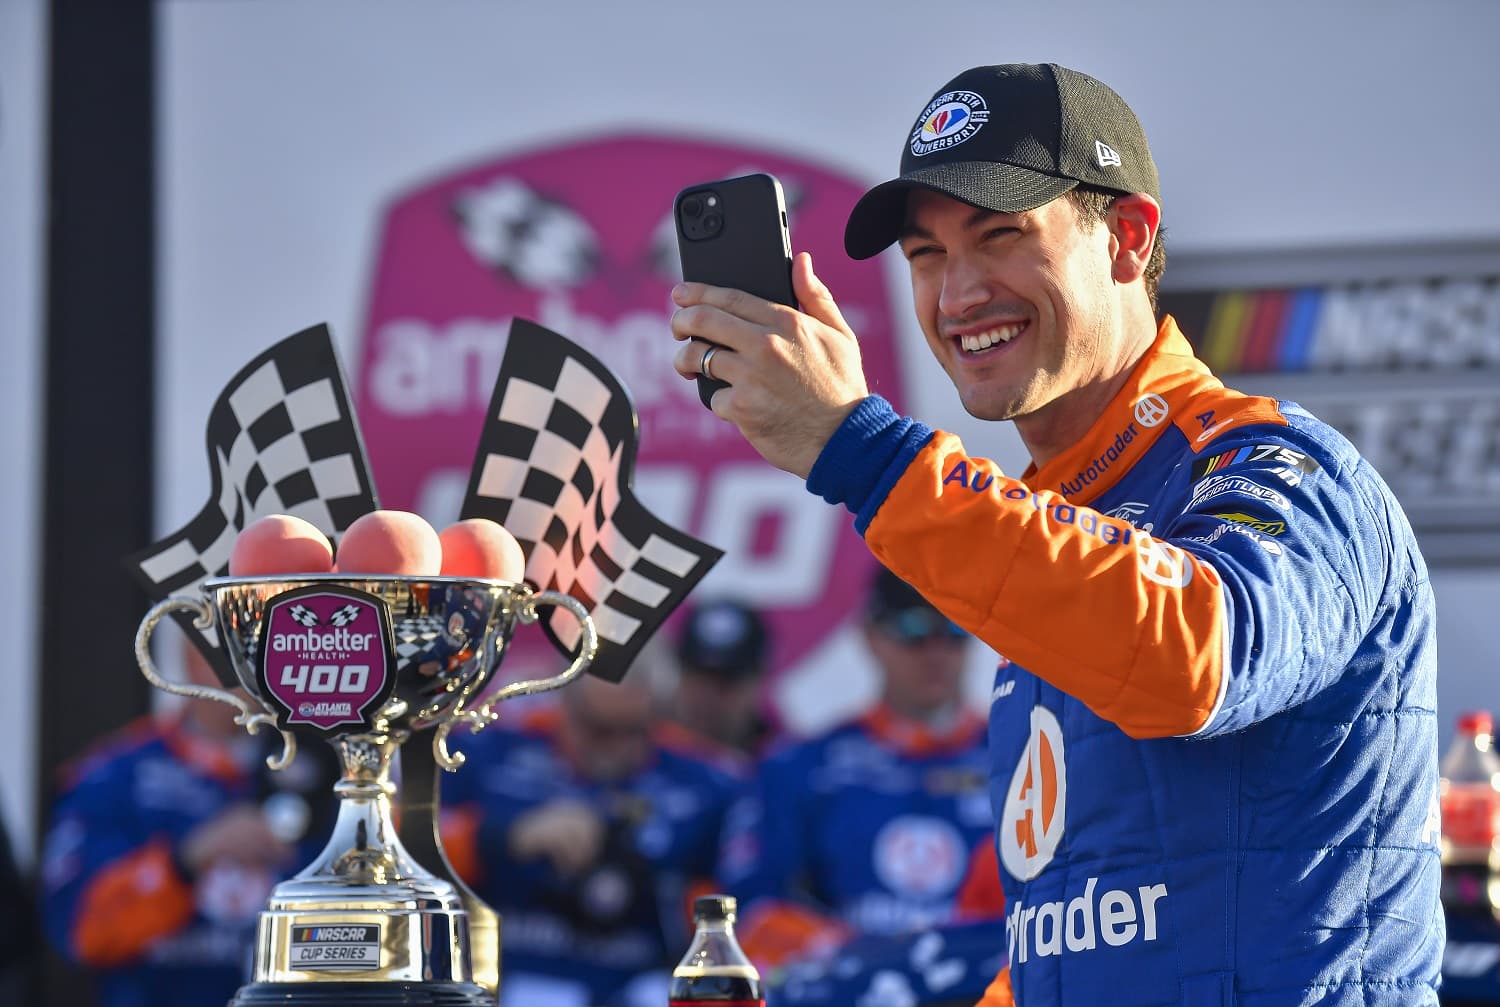 Joey Logano records a video with the trophy after winning the Ambetter Health 400 in the NASCAR Cup Series on , March 19, 2023 at Atlanta Motor Speedway.